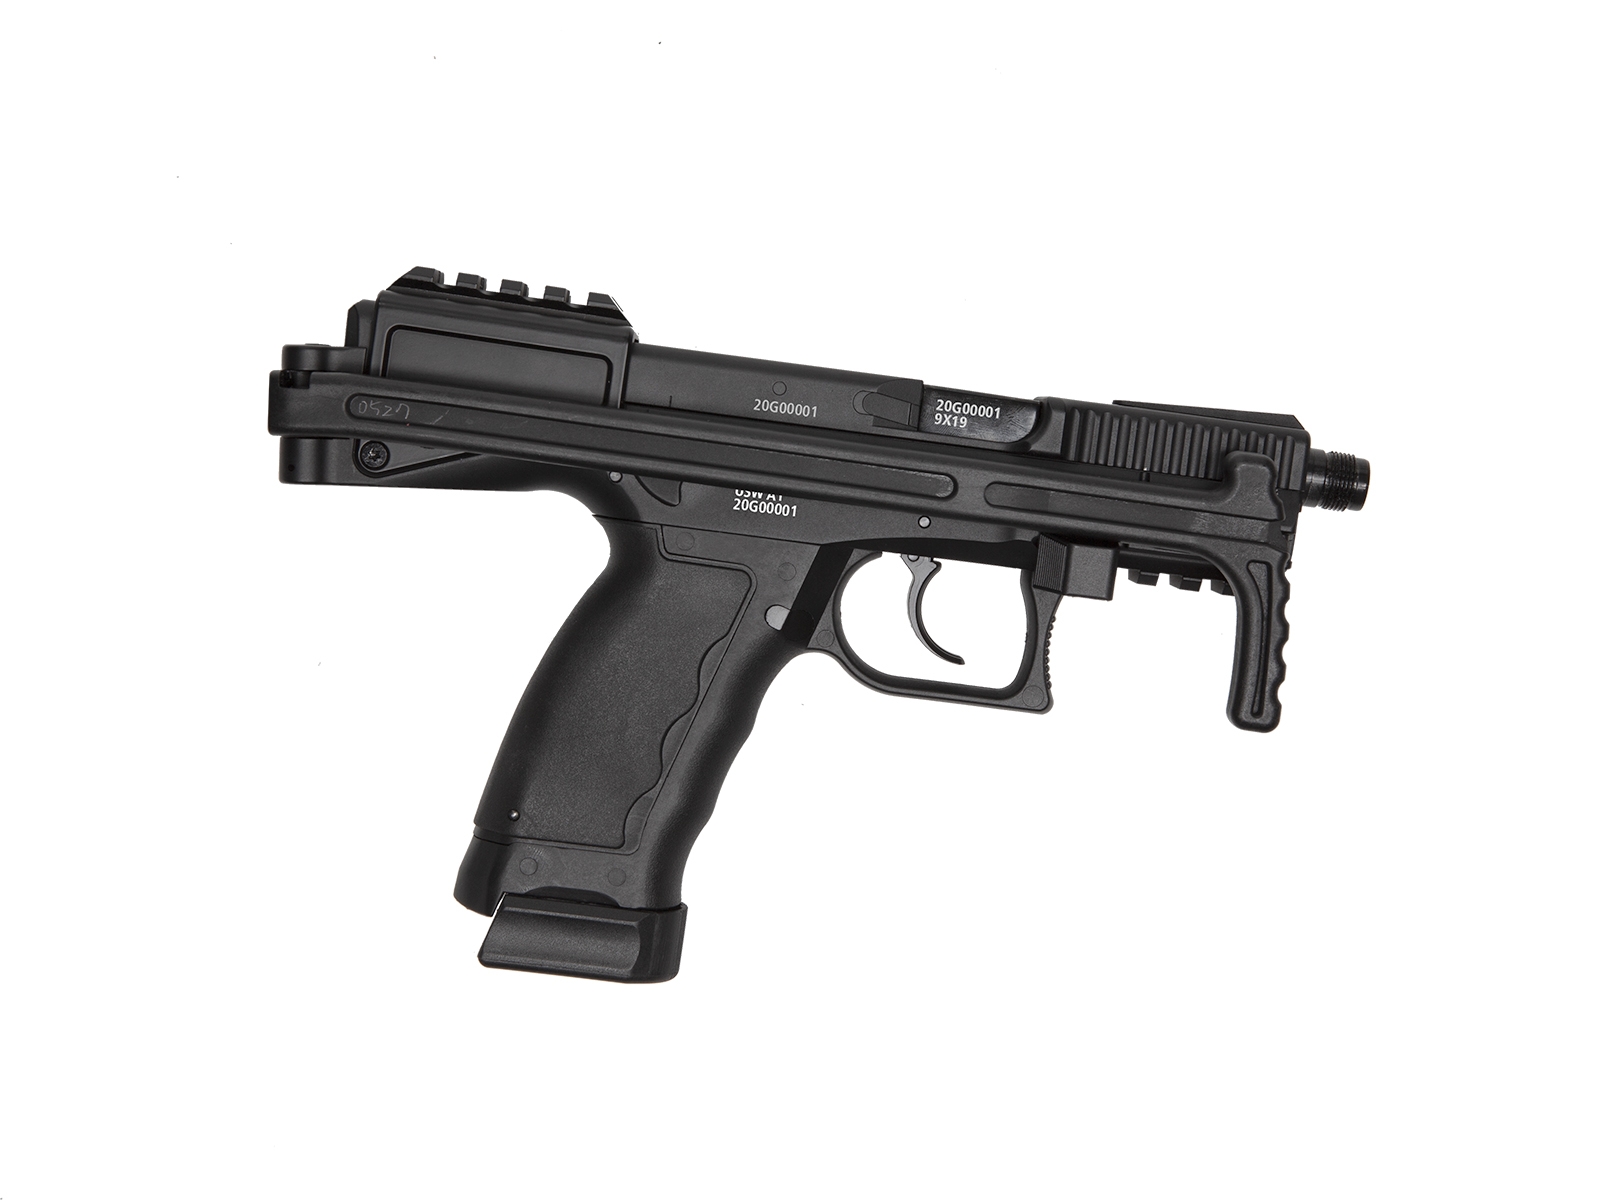 ASG%20B&T%20USW%20A1%20CO2%20Airsoft%20Tabanca%2019125